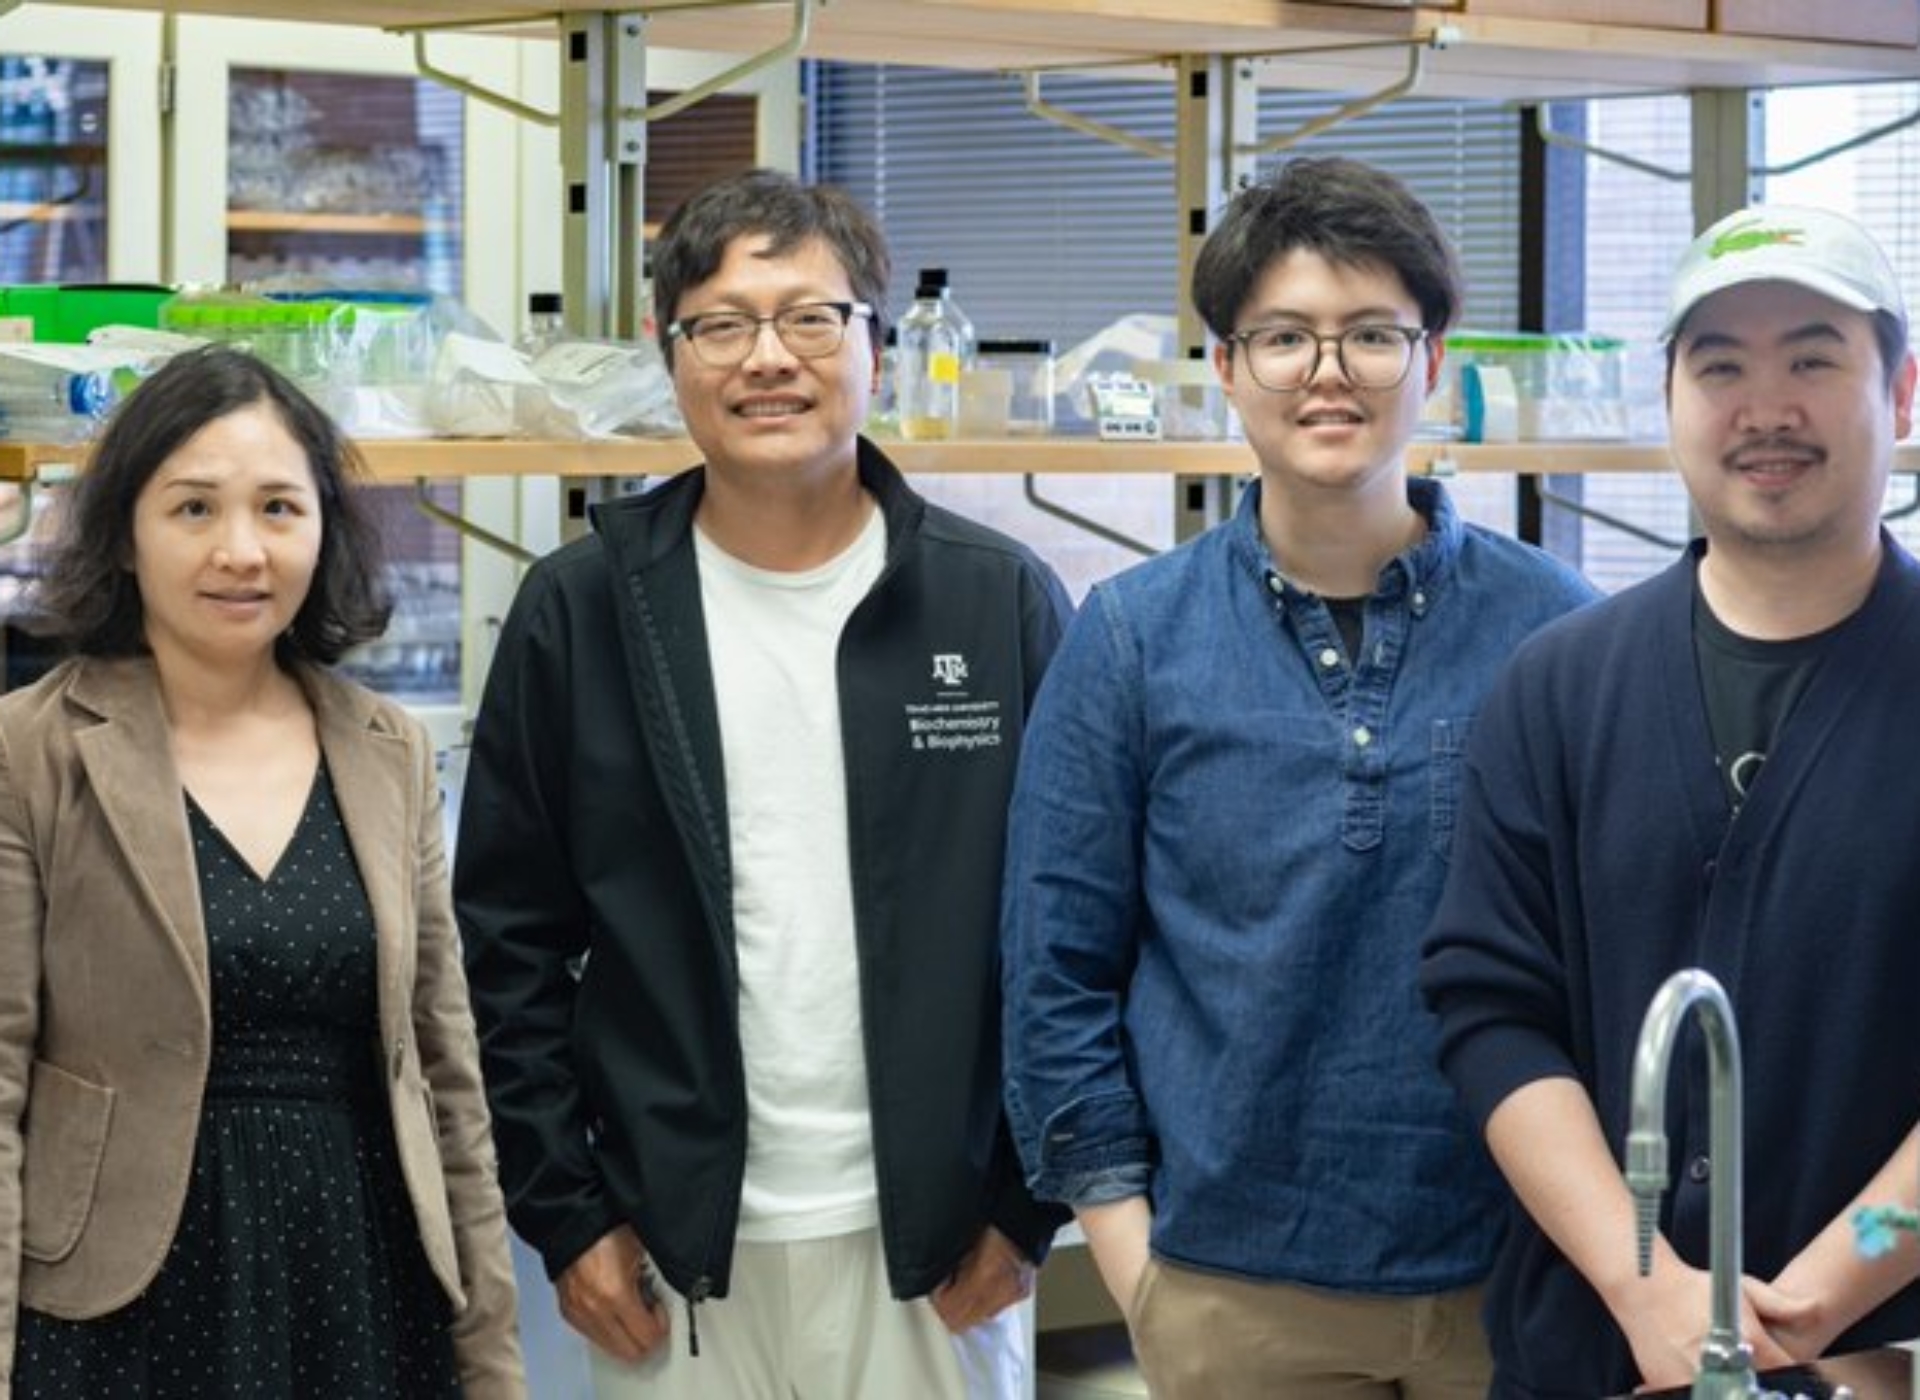 ssRNA SCIENCE PUBLICATION FEATURED IN AGRILIFE TODAY